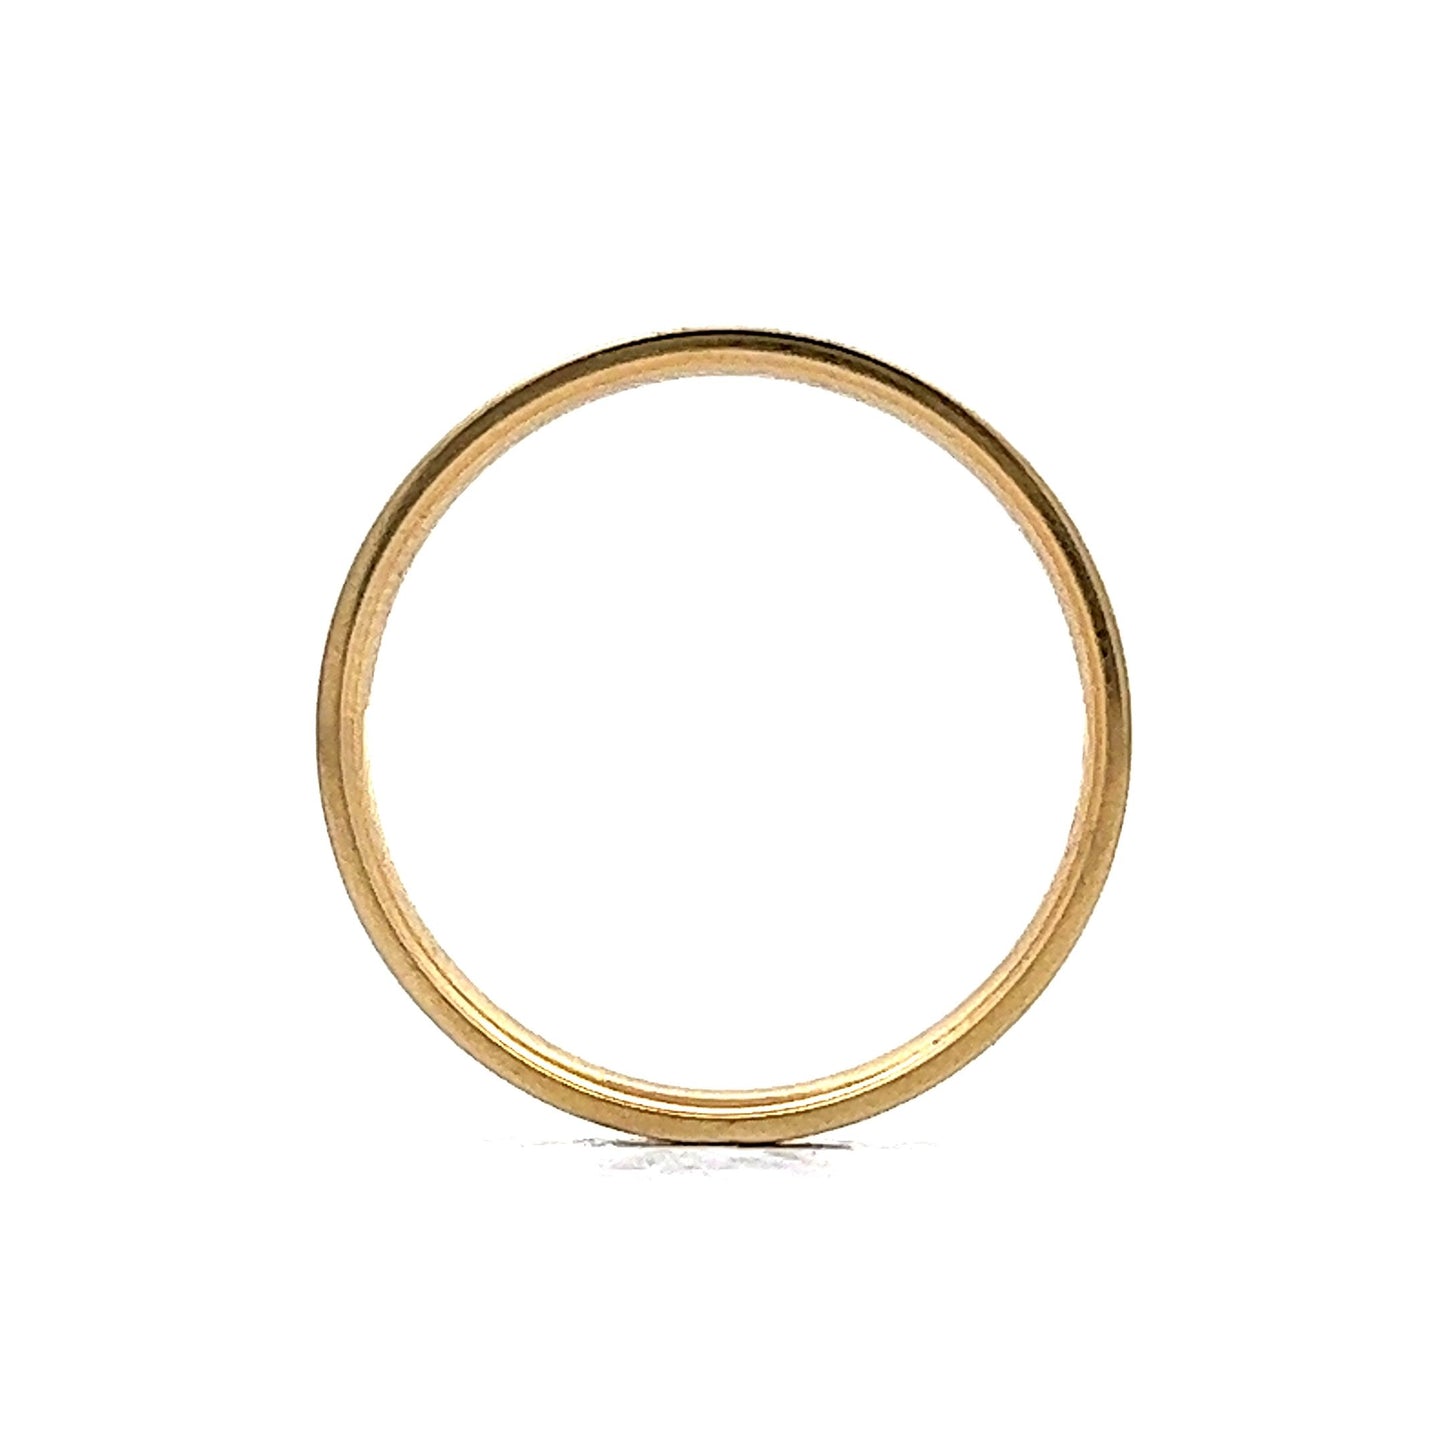 2mm Flat Edge Stacking Wedding Band in 14k Yellow Gold